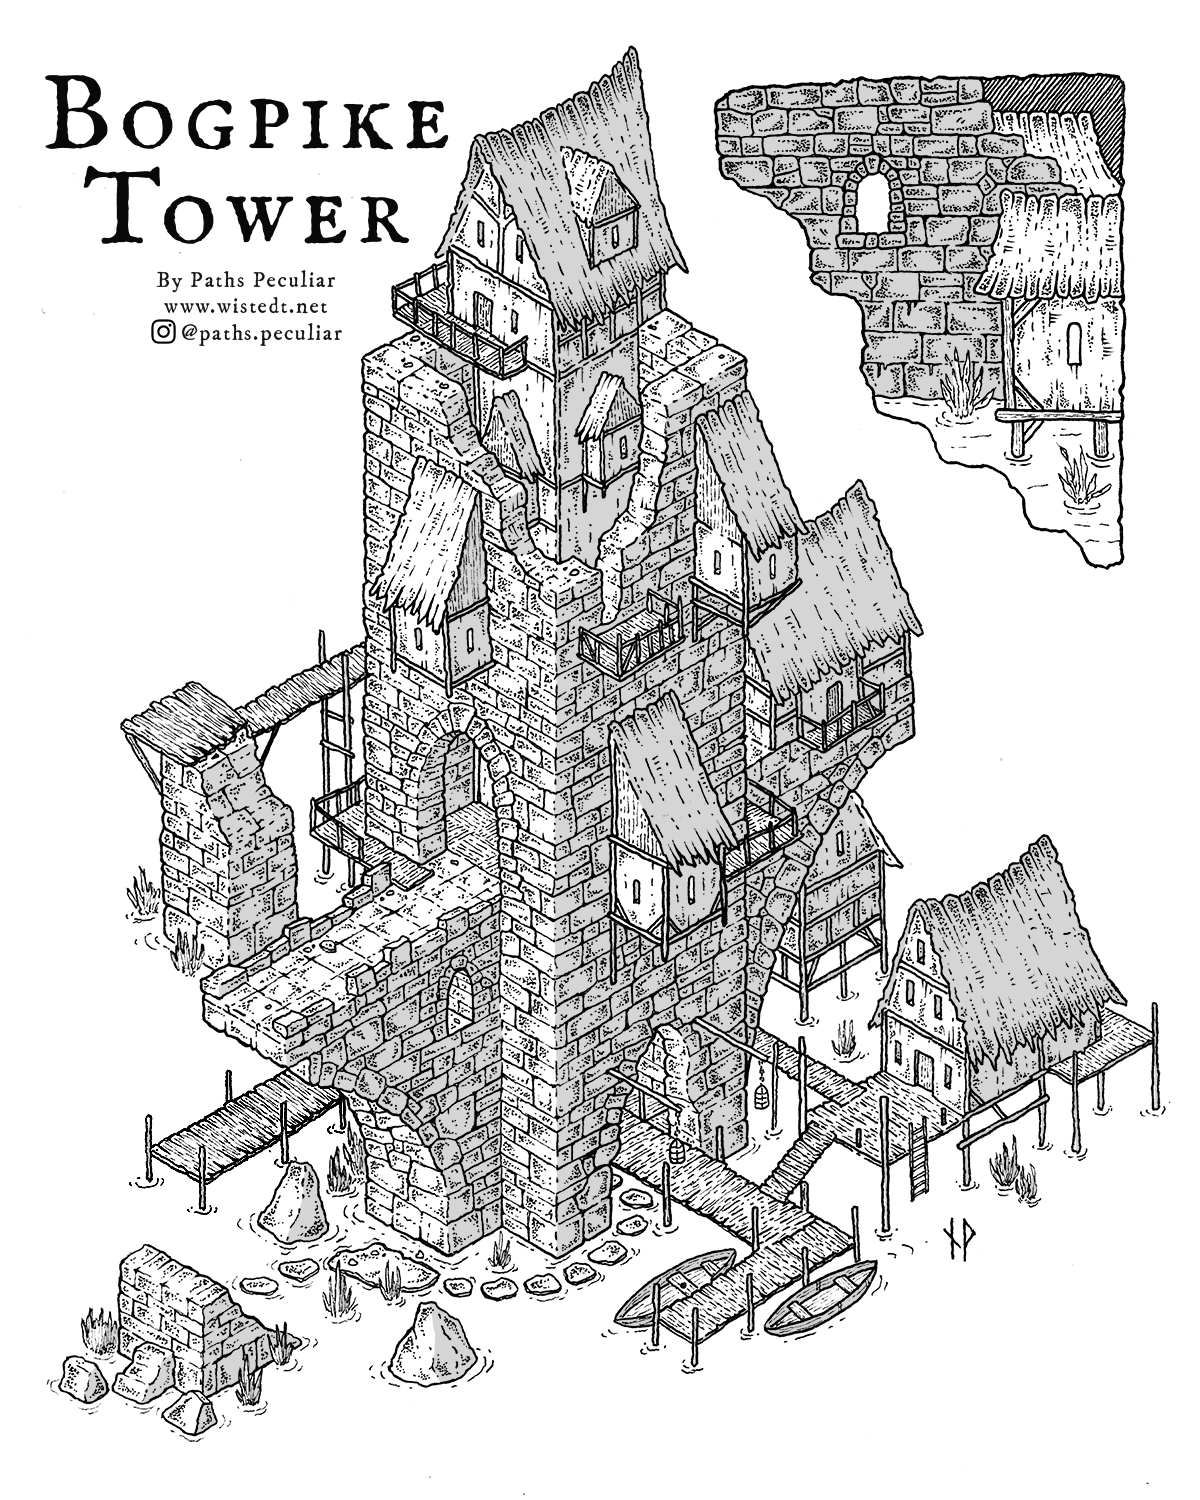 The Bogpike Tower – isometric fantasy tower map